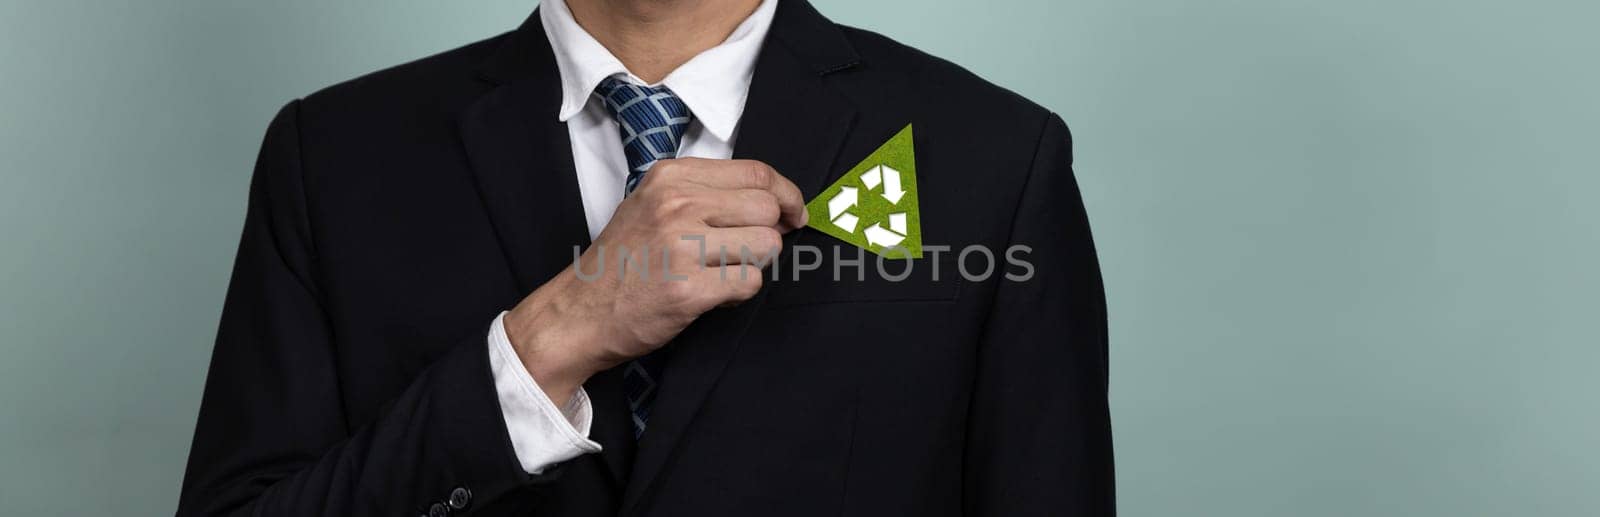 Corporate promoting sustainable and green business concept with businessman holding Recycle symbol paper as Reduce Reuse Recycle concept for waste management for clean environment idea. Alter